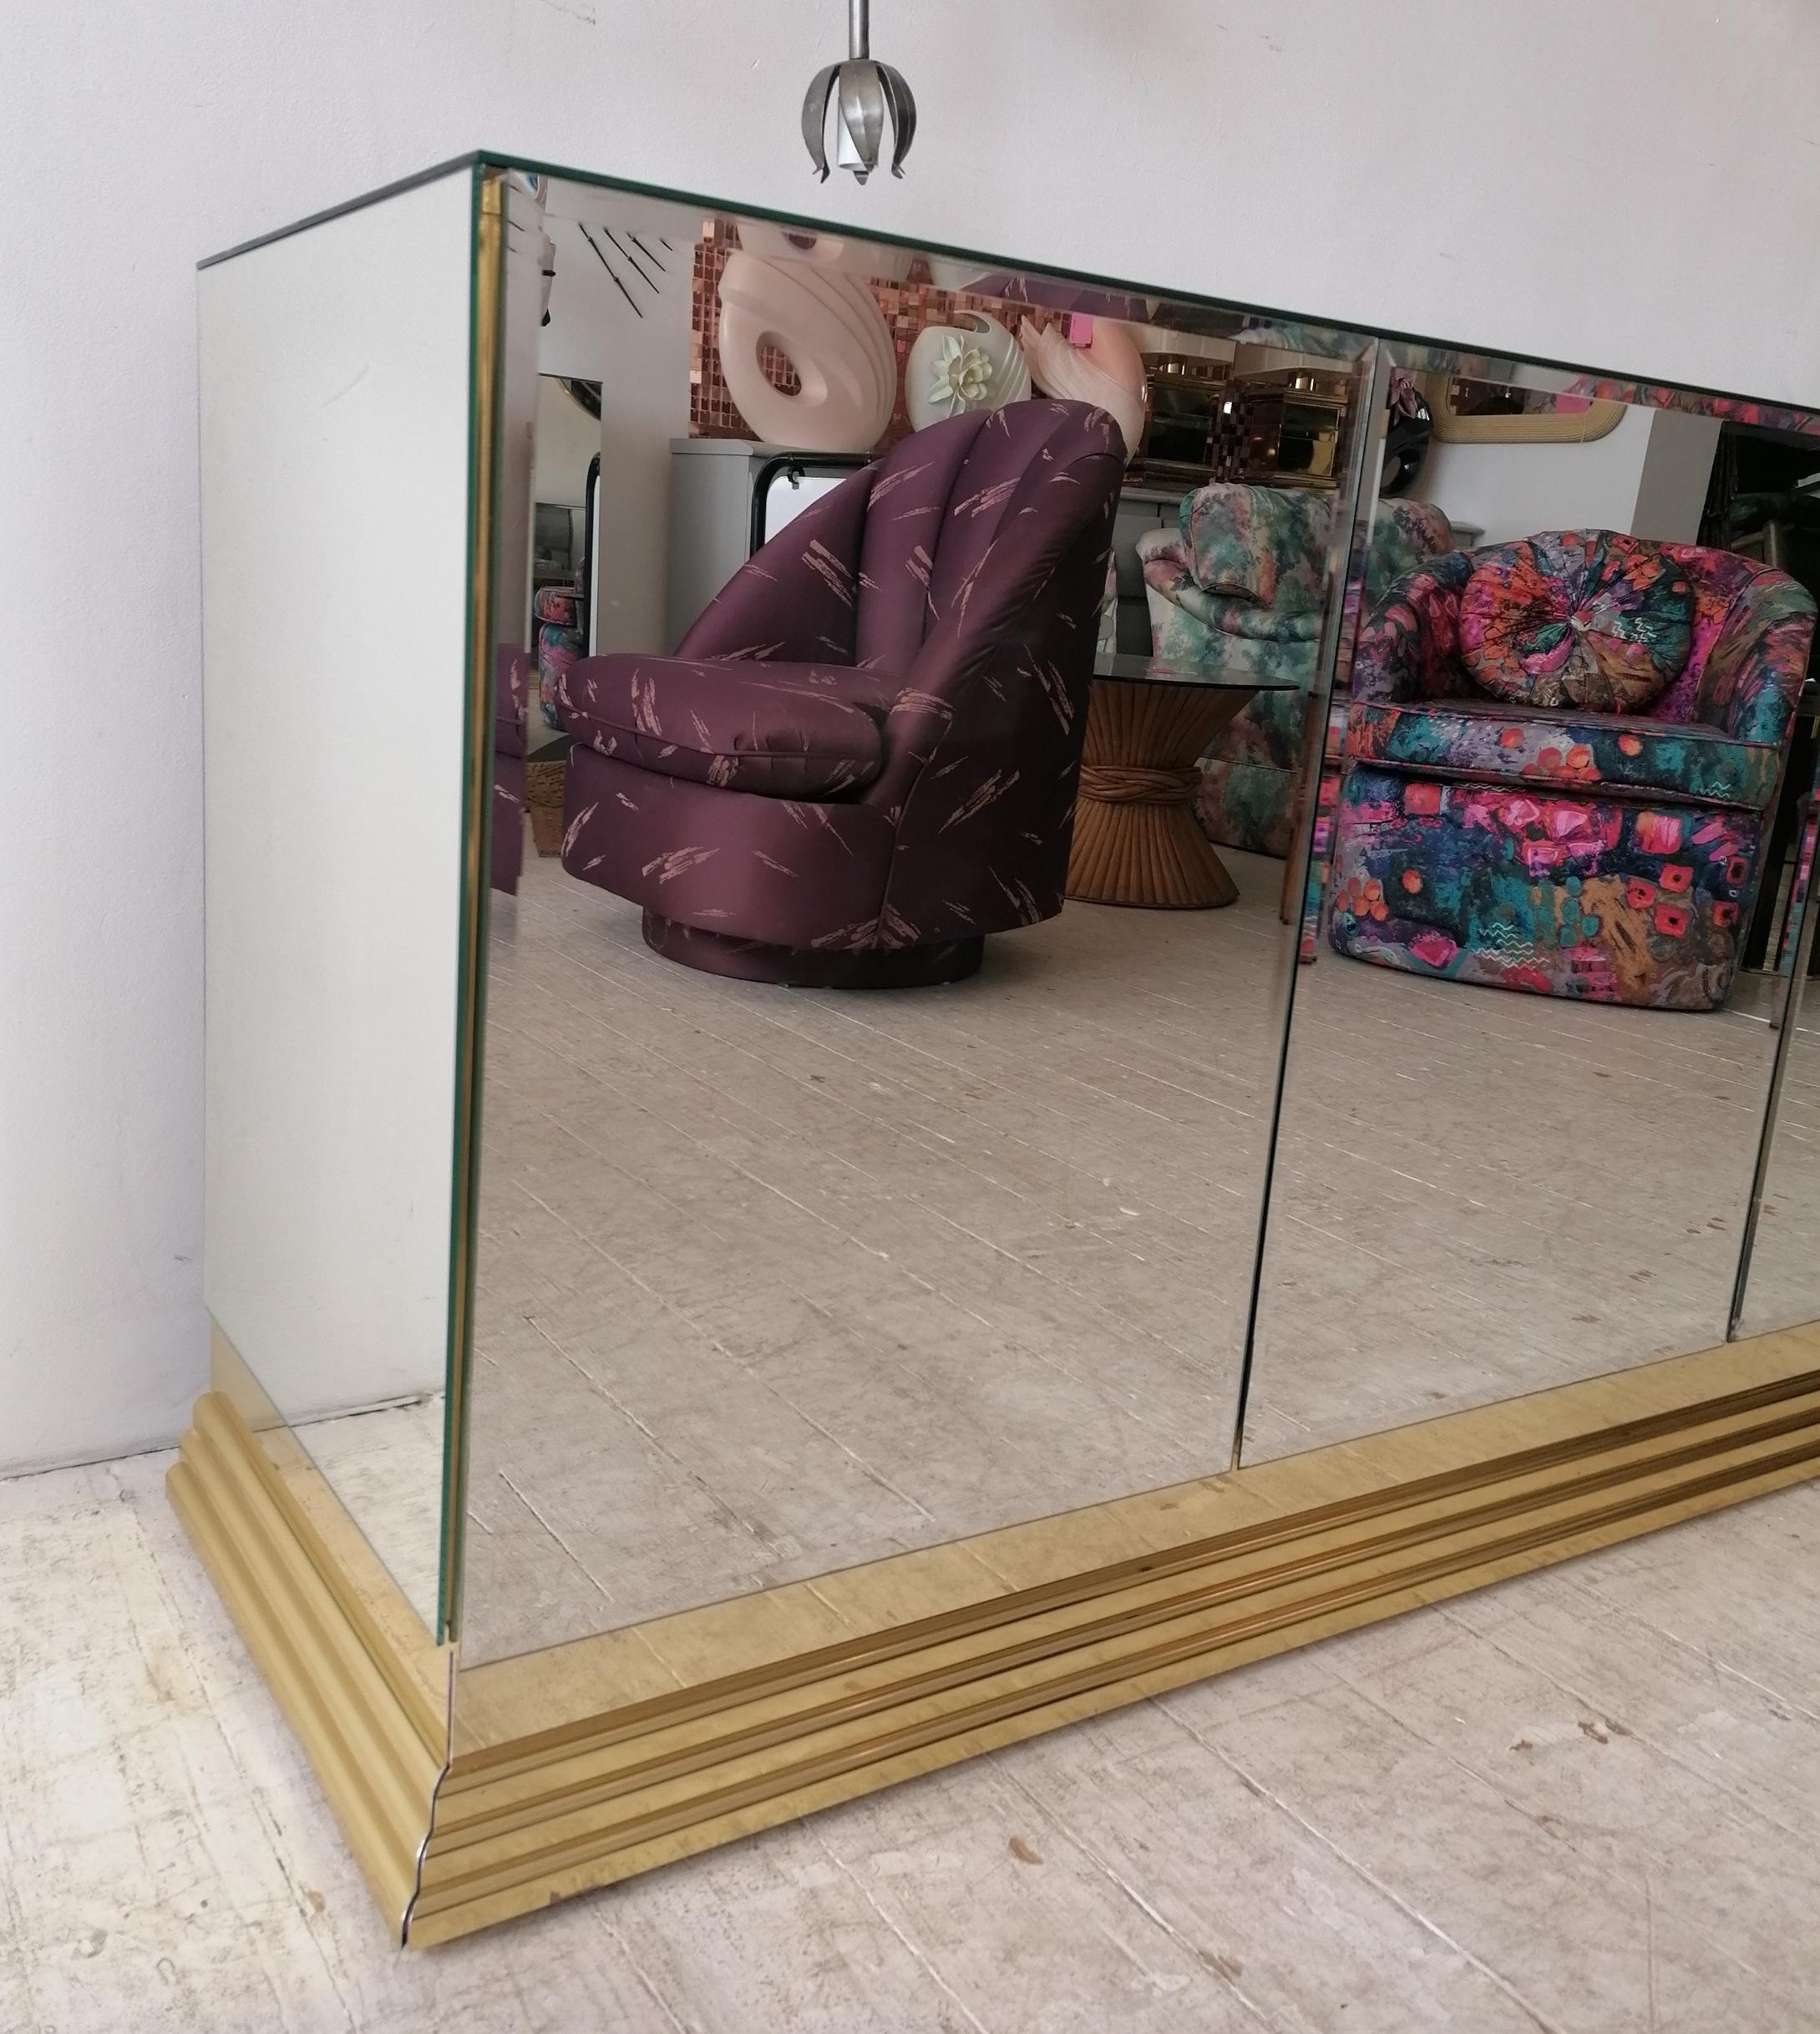 Vintage American Mirrored Glass Sideboard By Ello Furniture, 1970s 1980s 5